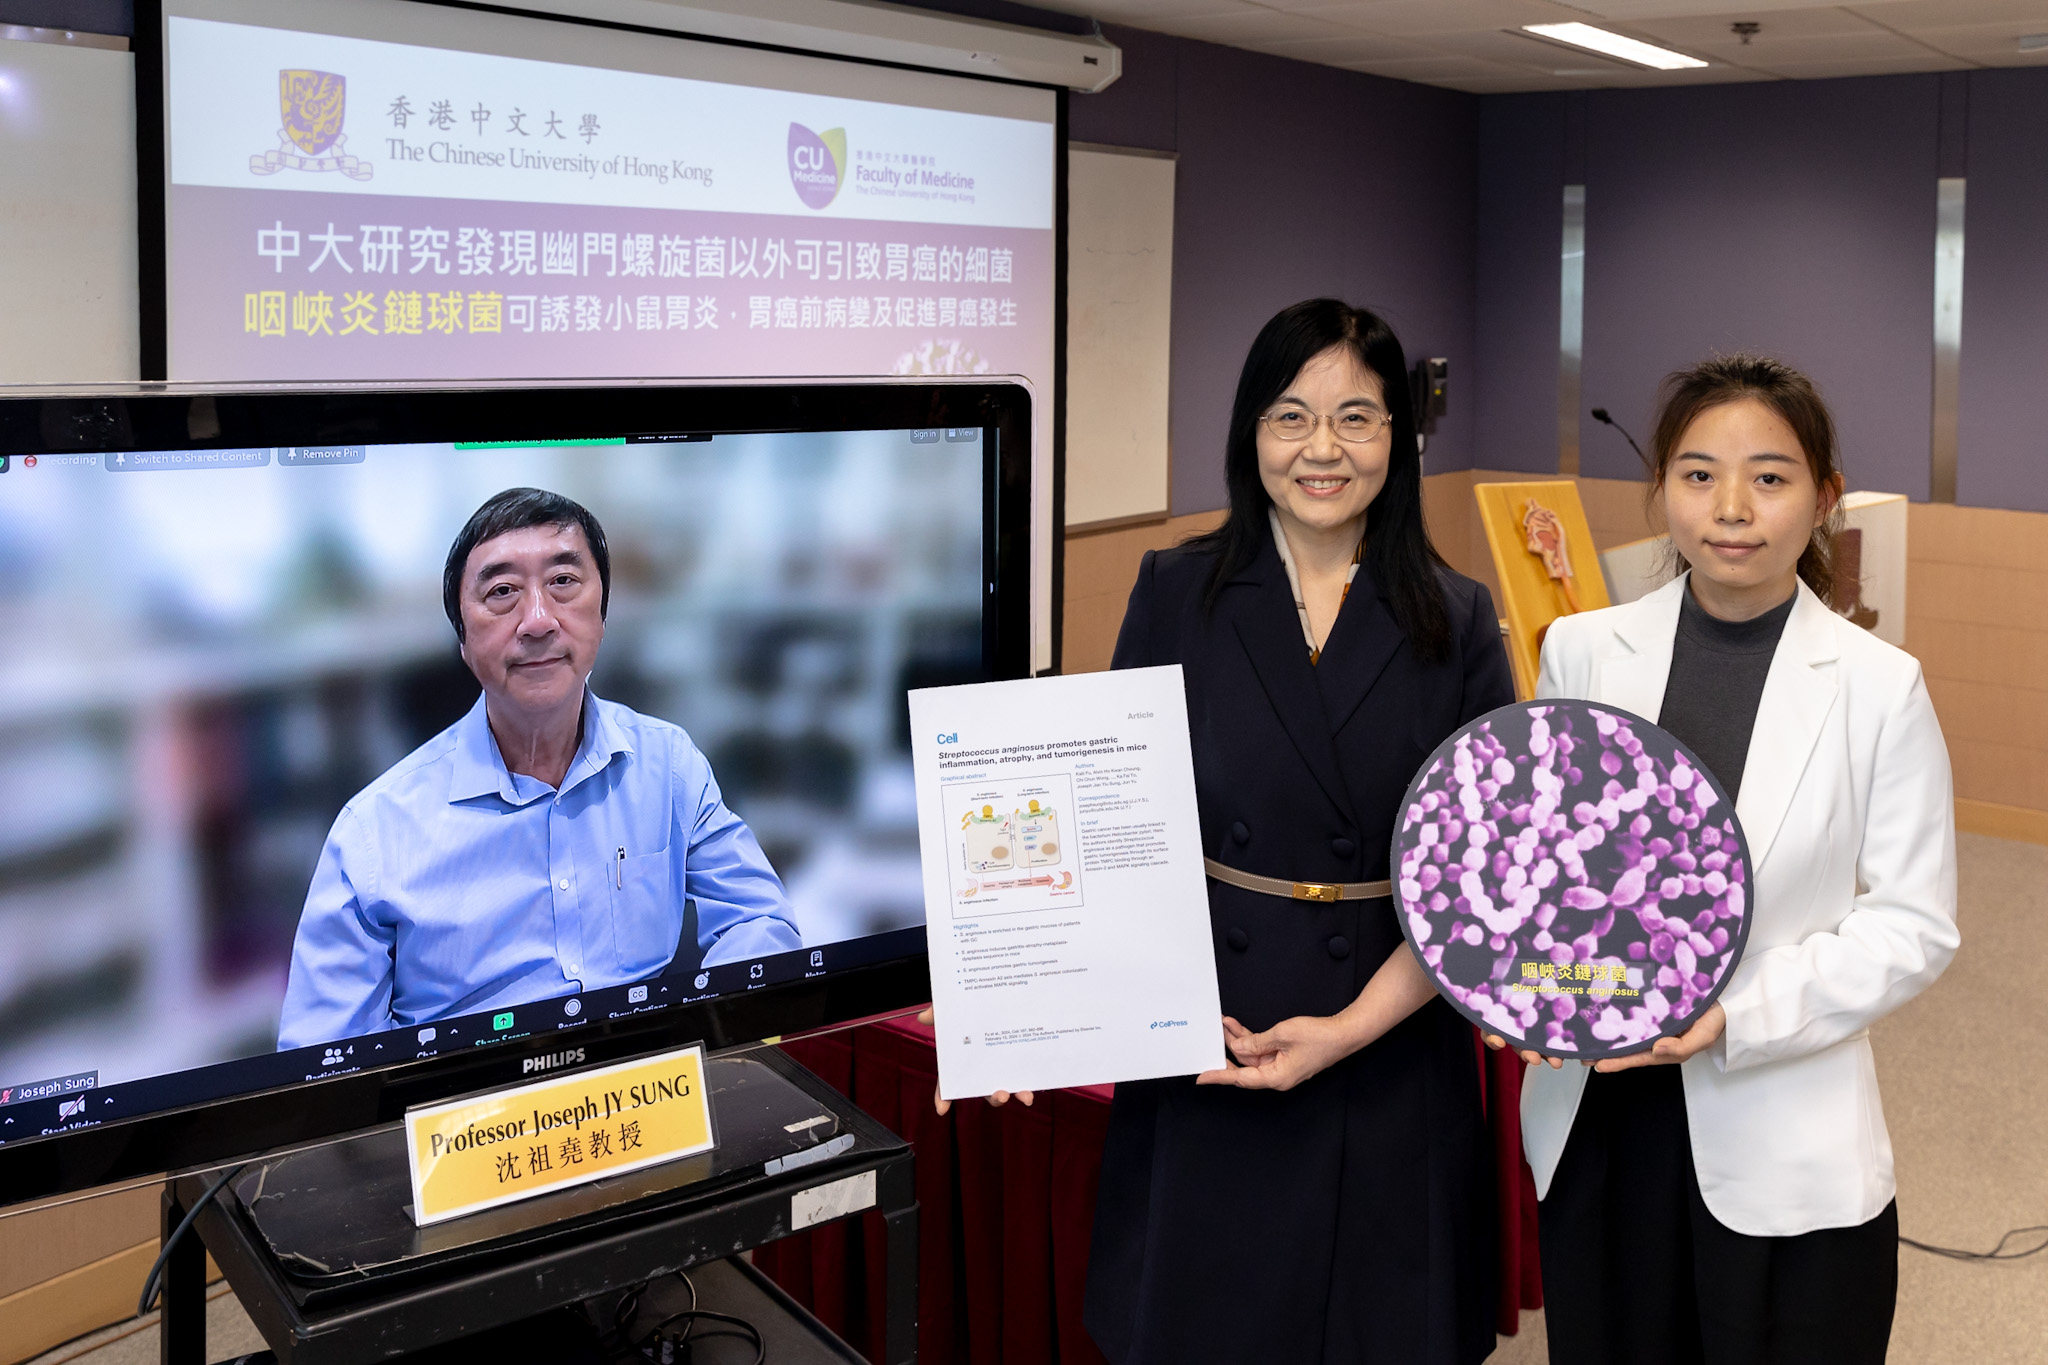 Researchers at the faculty of medicine of the Chinese University of Hong Kong have found that S. anginosus bacteria can increase the risk of stomach cancer. Photo: Handout